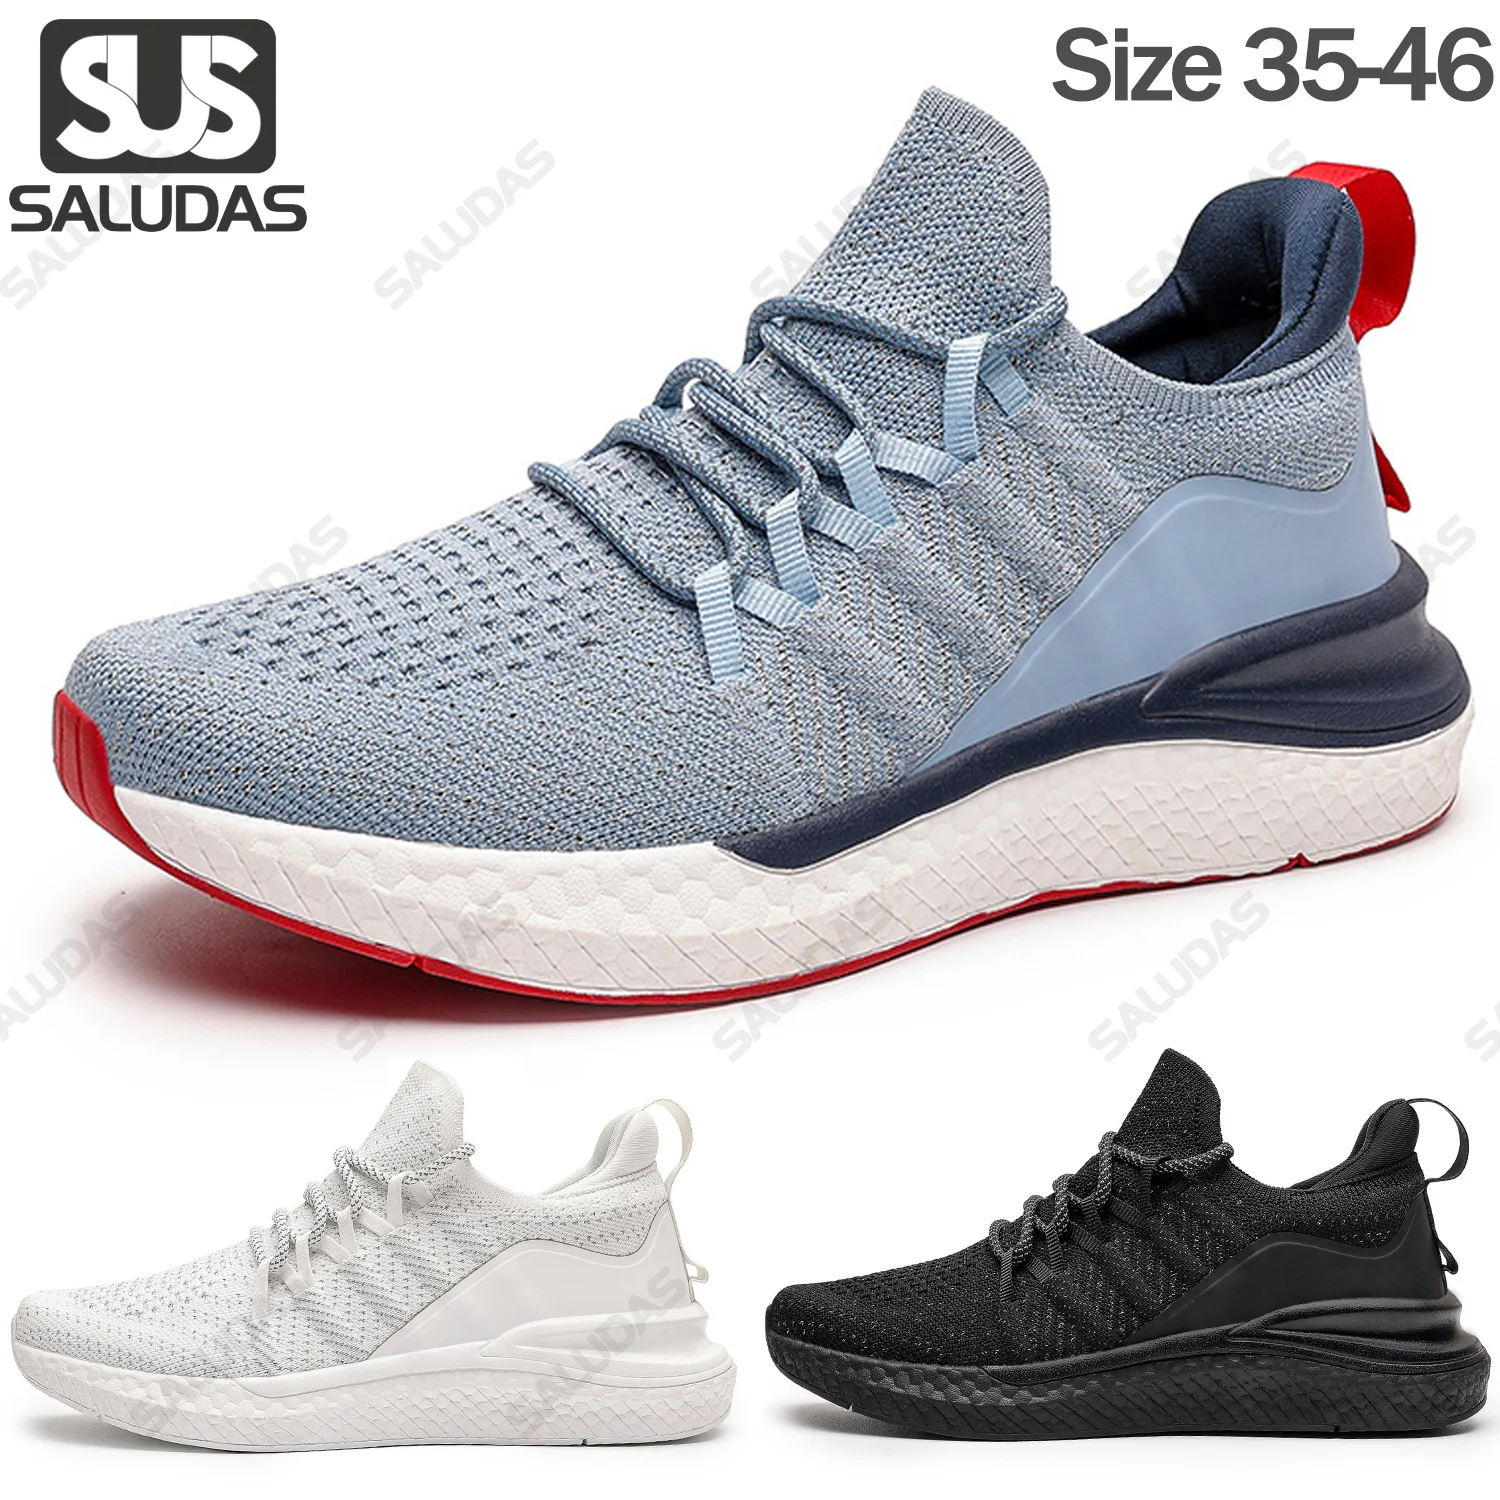 SALUDAS Men Sneakers Fishbone Locking System Sports Shoes 5 Lightweight Shoe Stretch Knitt Breathable City Runing Women Sneakers